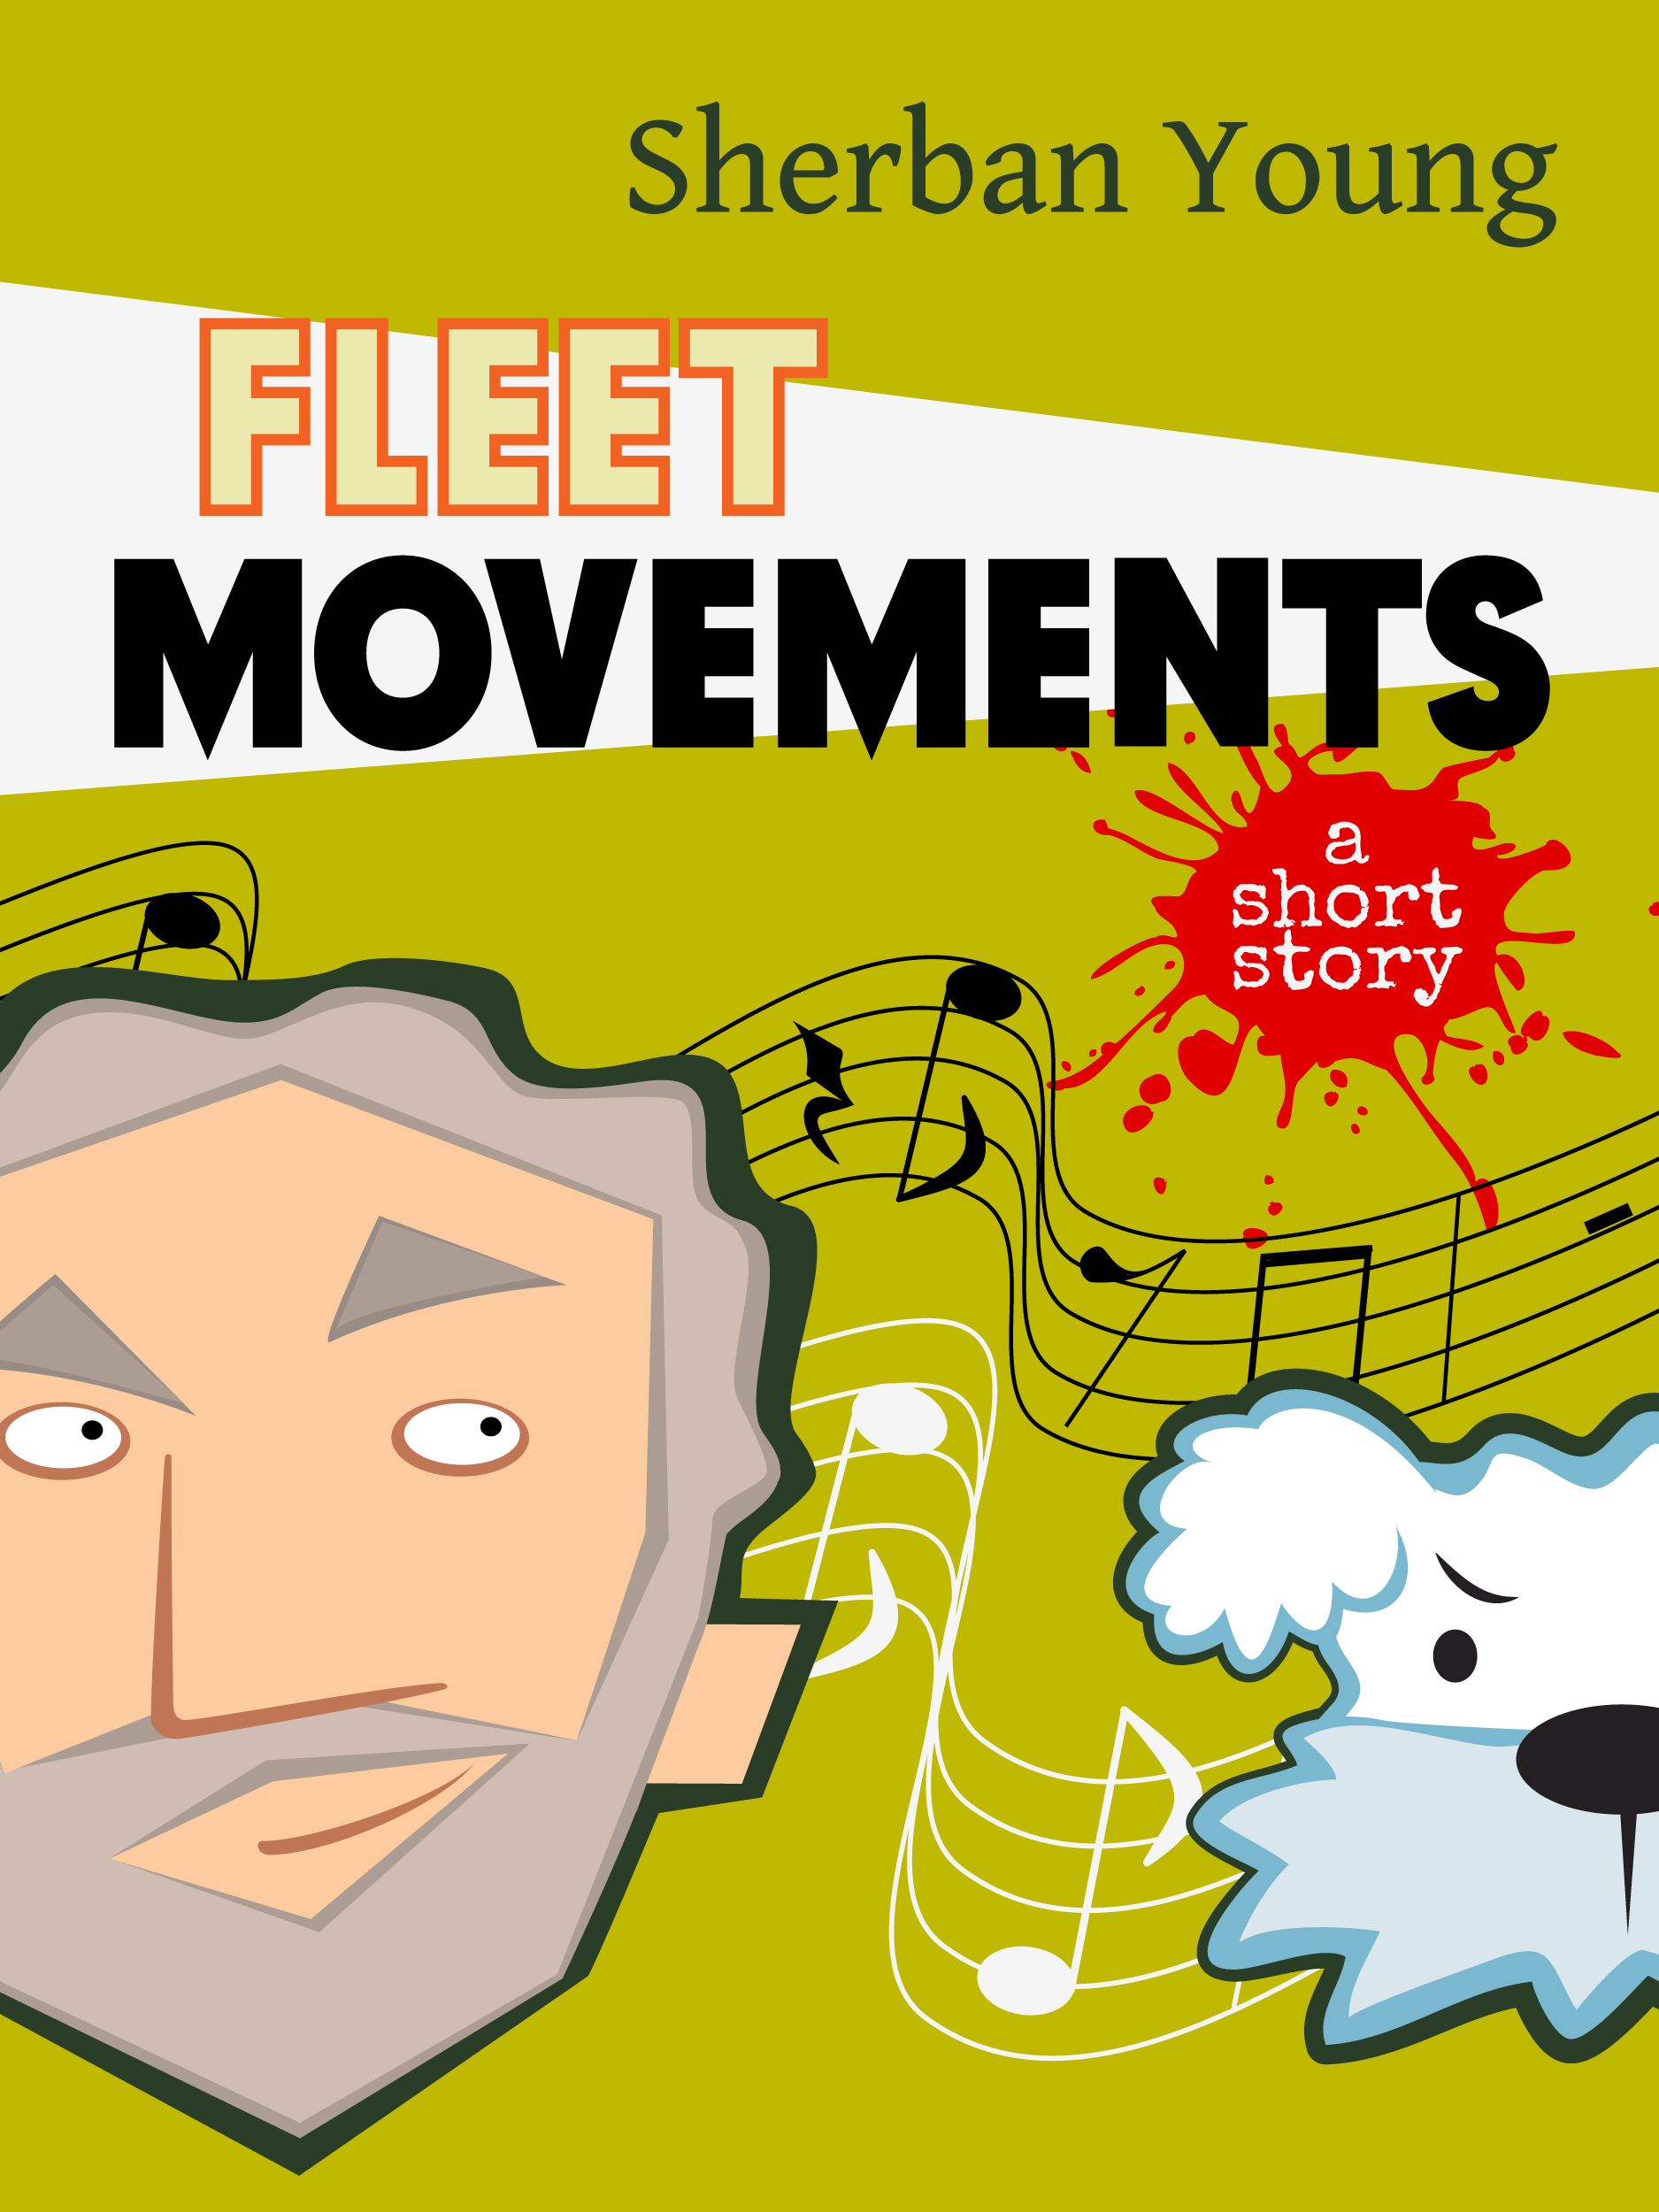 Movements-Cover.jpg